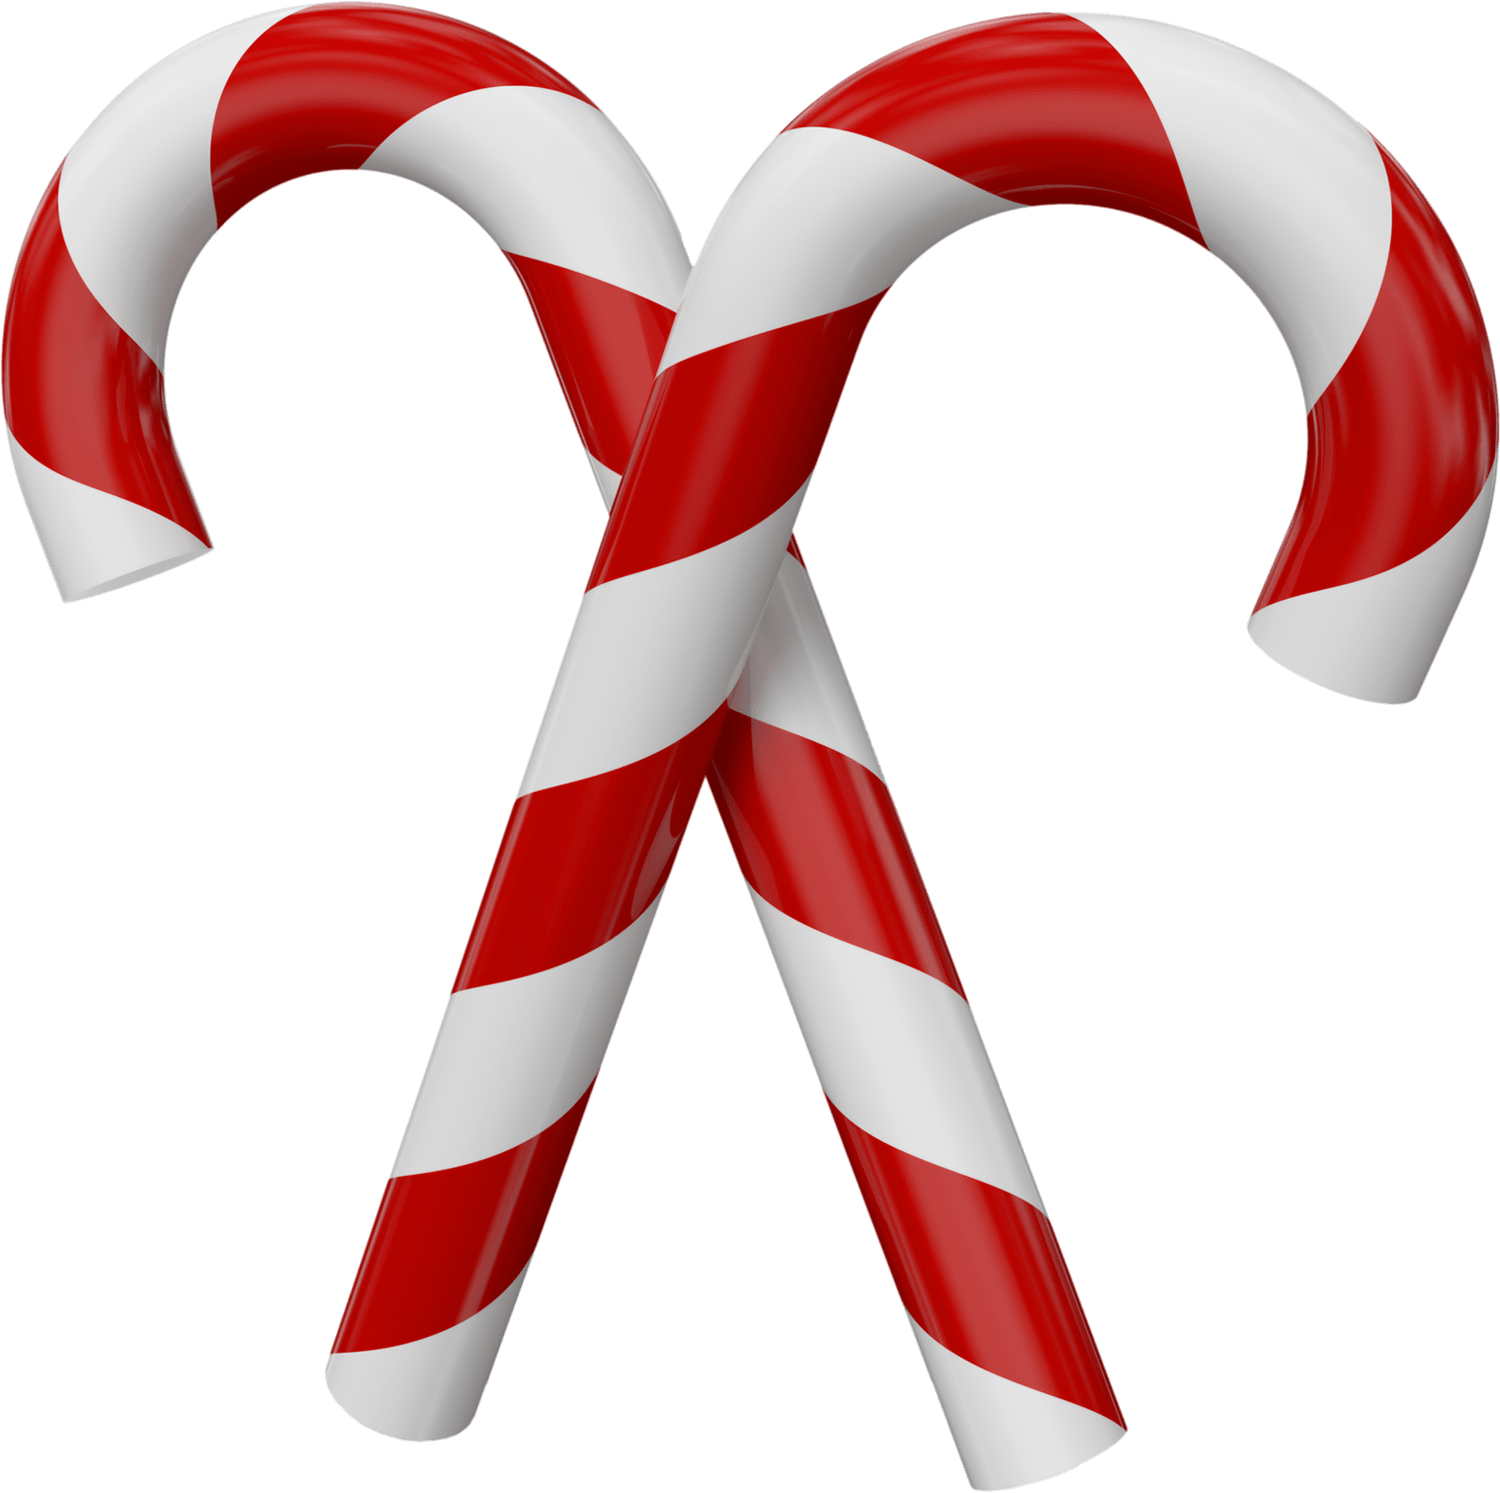 Download Our Booking Form - Candy Canes Png (1500x1493)